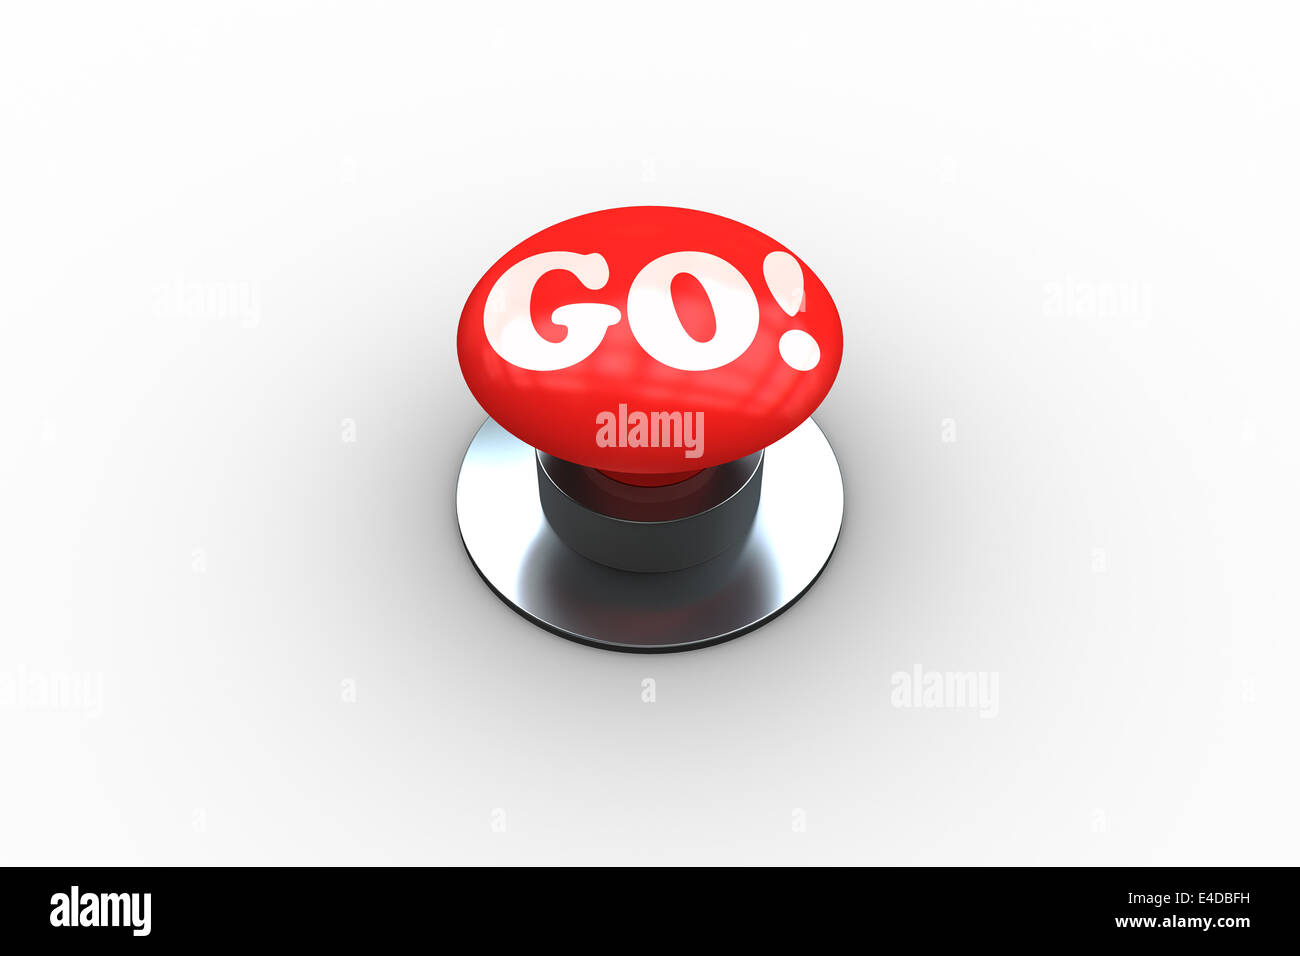 Go on digitally generated red push button Stock Photo